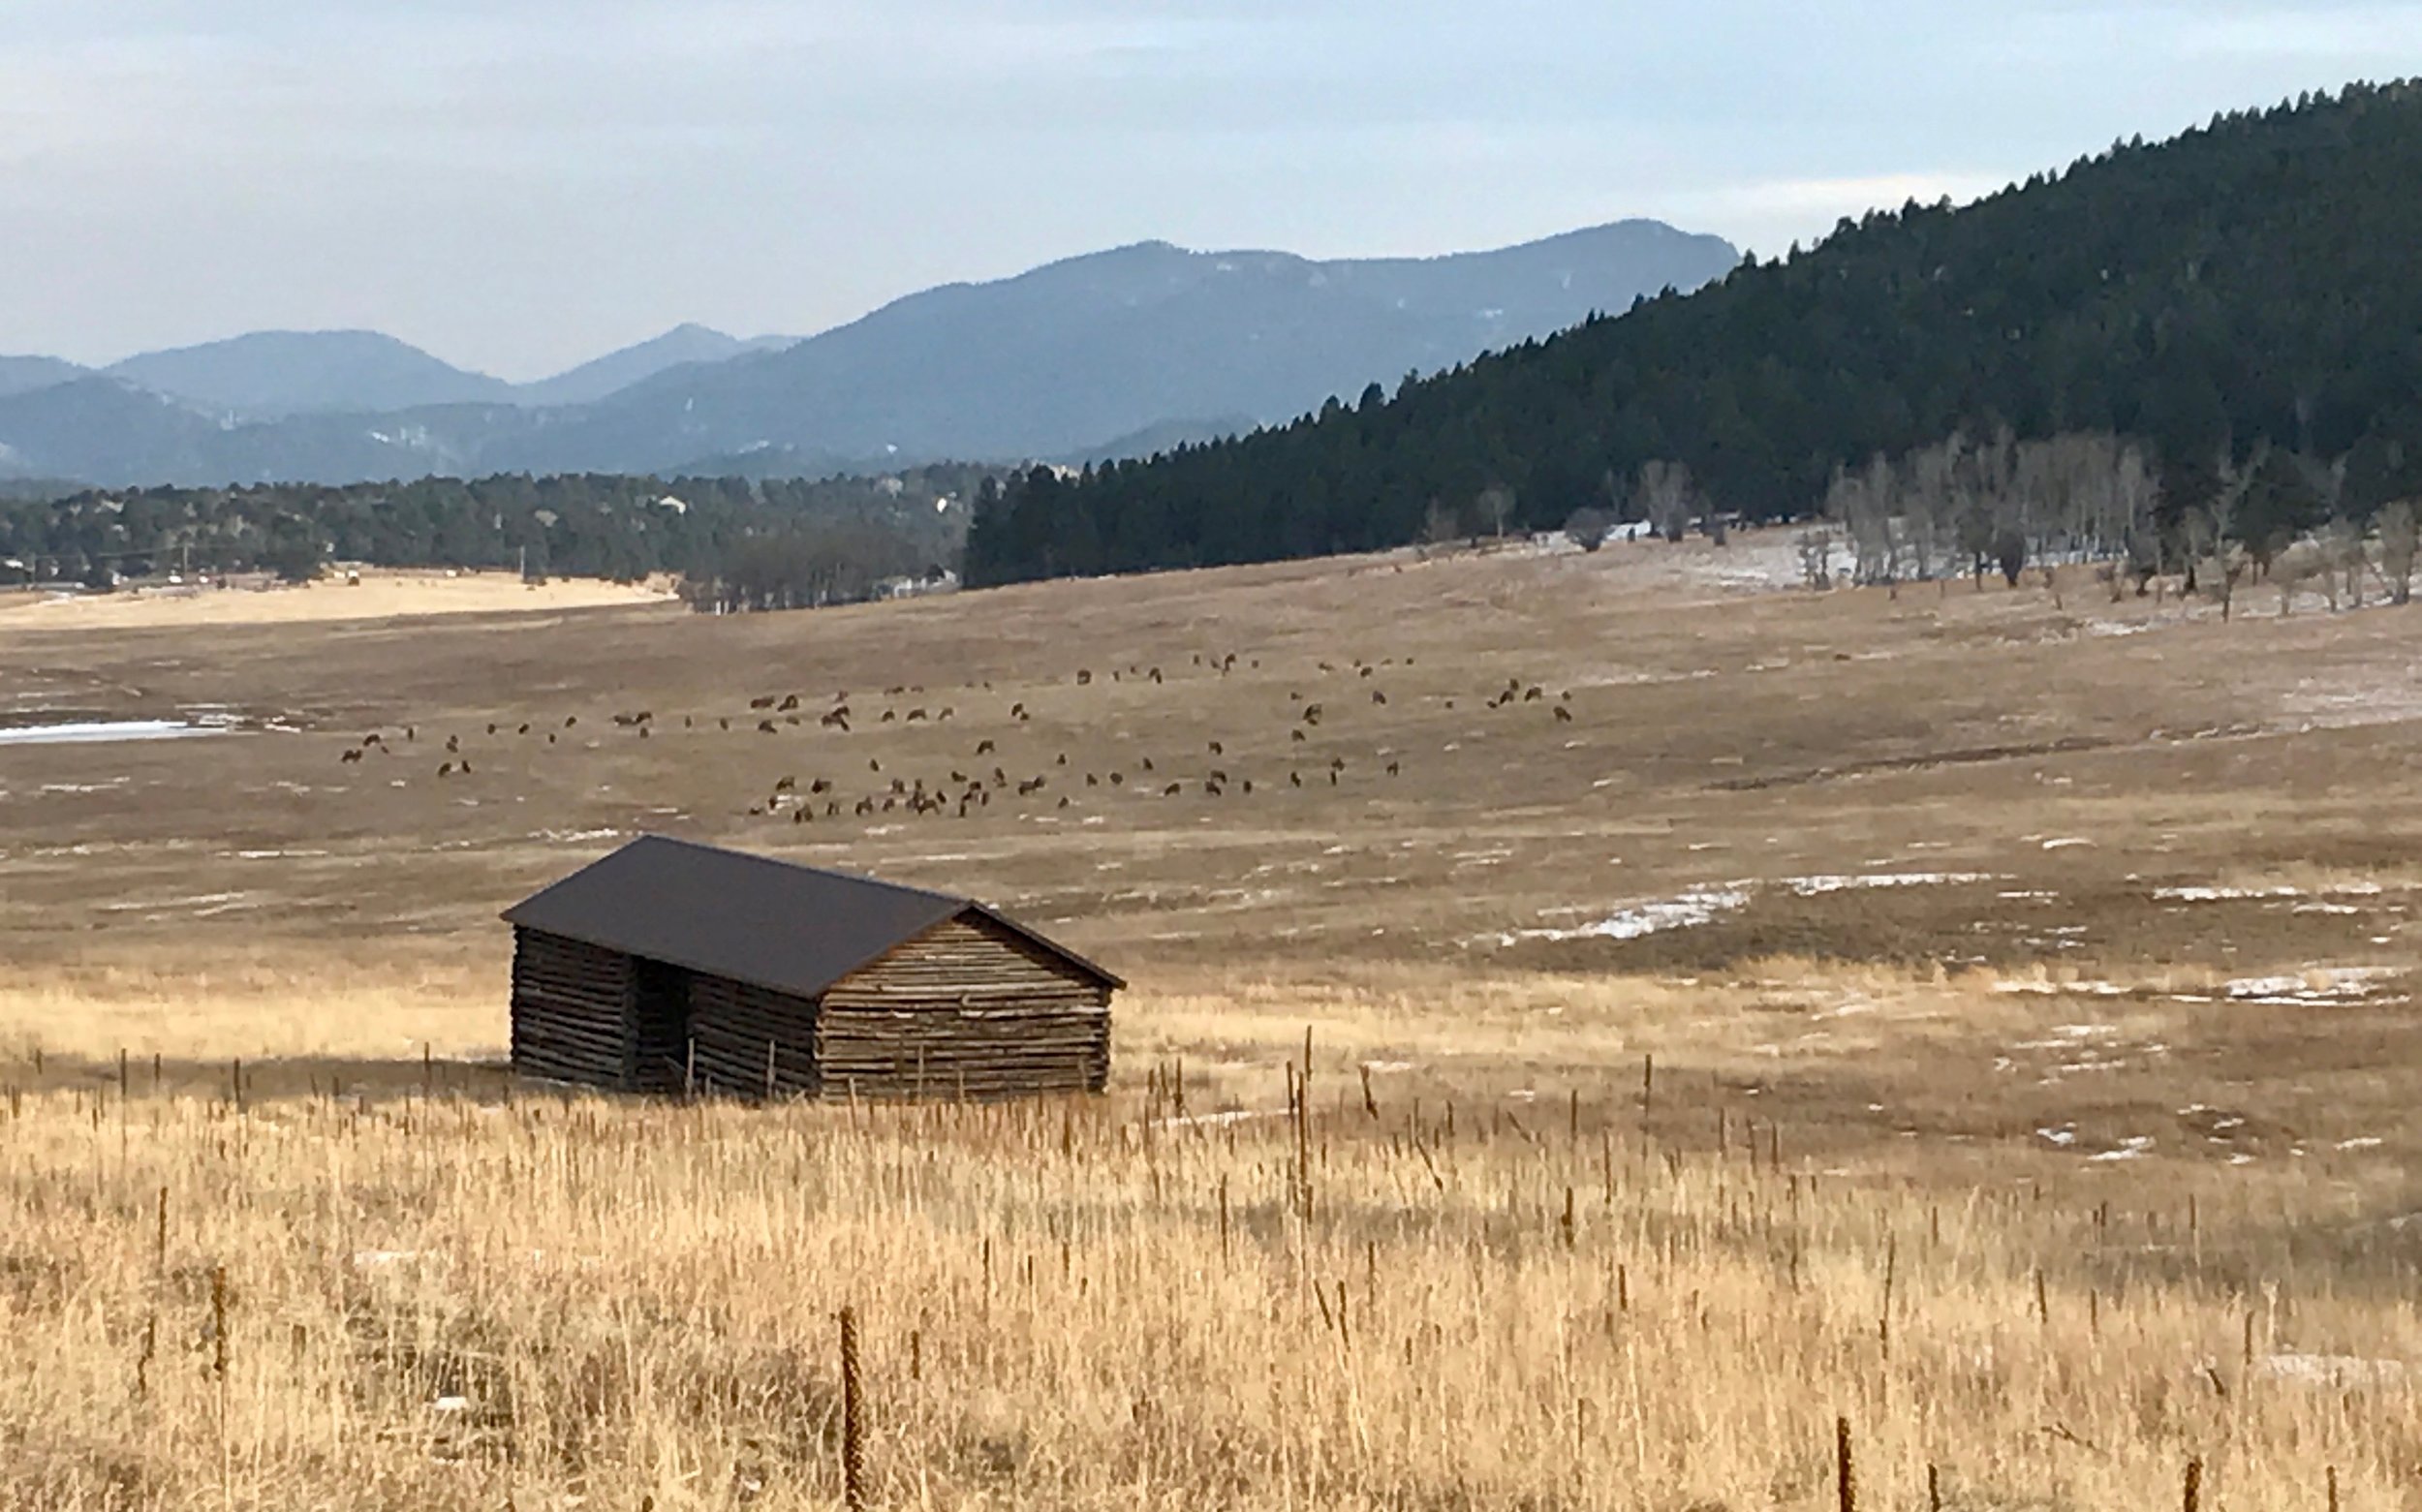  Elk in their eponymous meadow on the way back to Evergreen. 